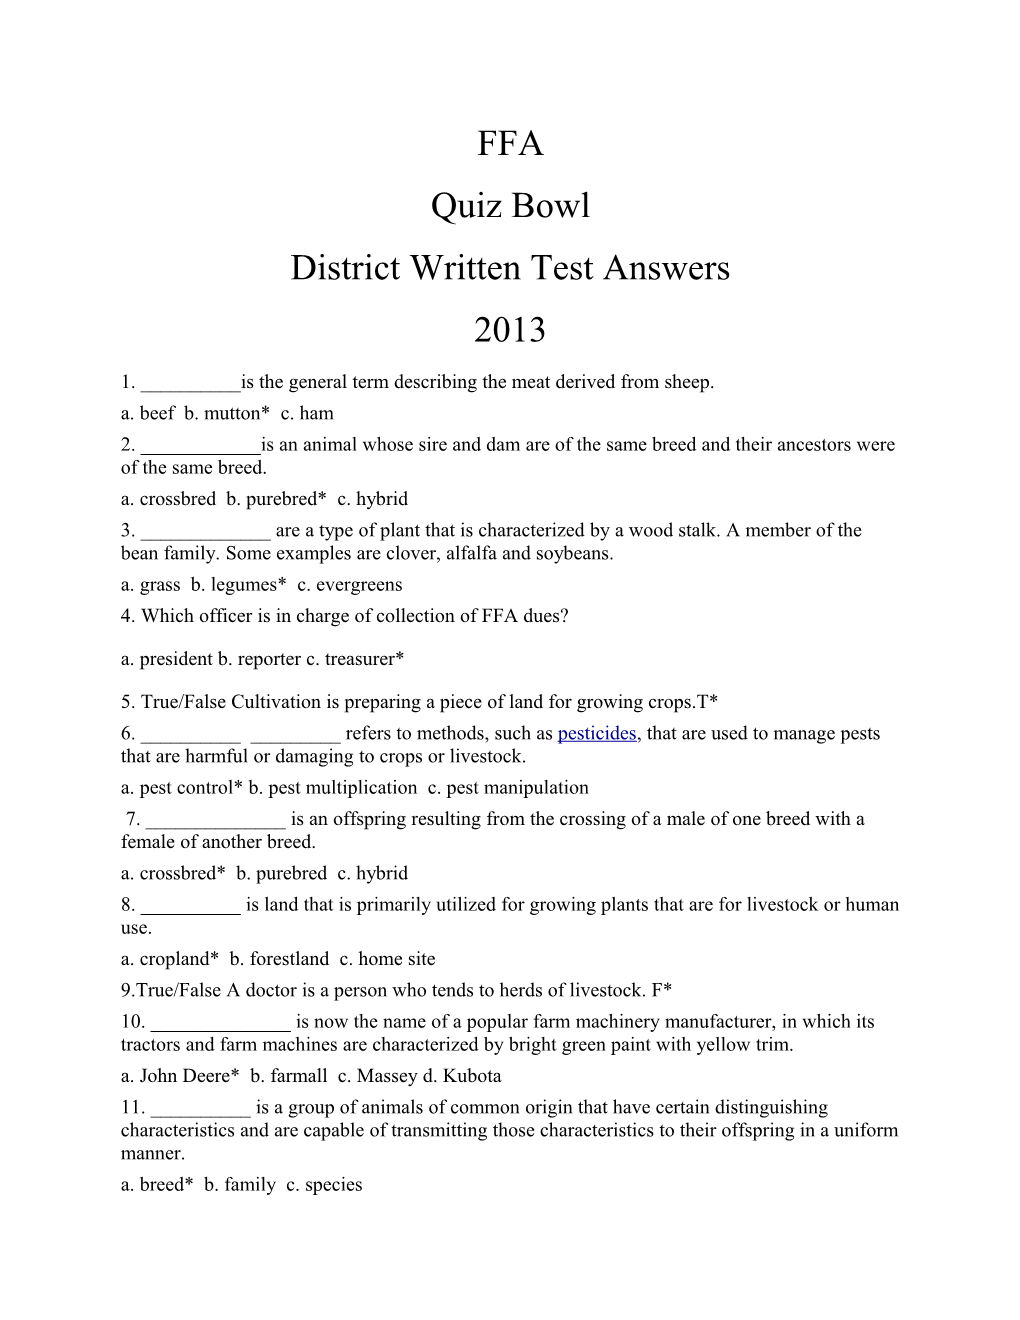 District Written Test Answers